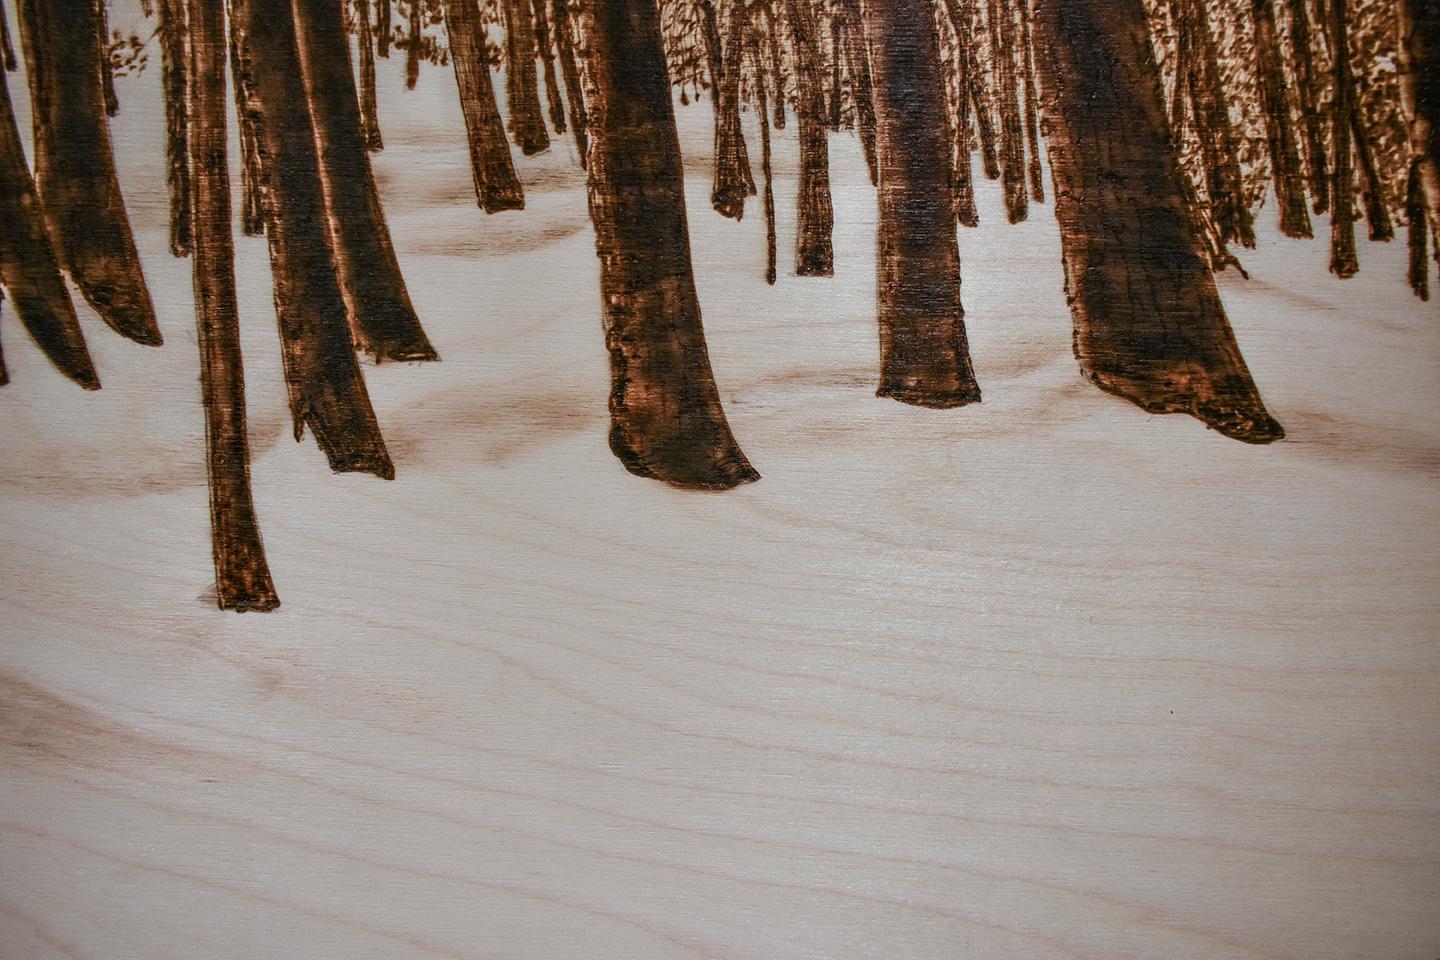 Burned and scorched drawing on Baltic Birch panel of a Birch forest and snowy landscape
Made with a small blowtorch, naturally sepia toned 
24 x 36 inches unframed
The sides are burned a dark umber so framing is not necessary
Ready to hang as